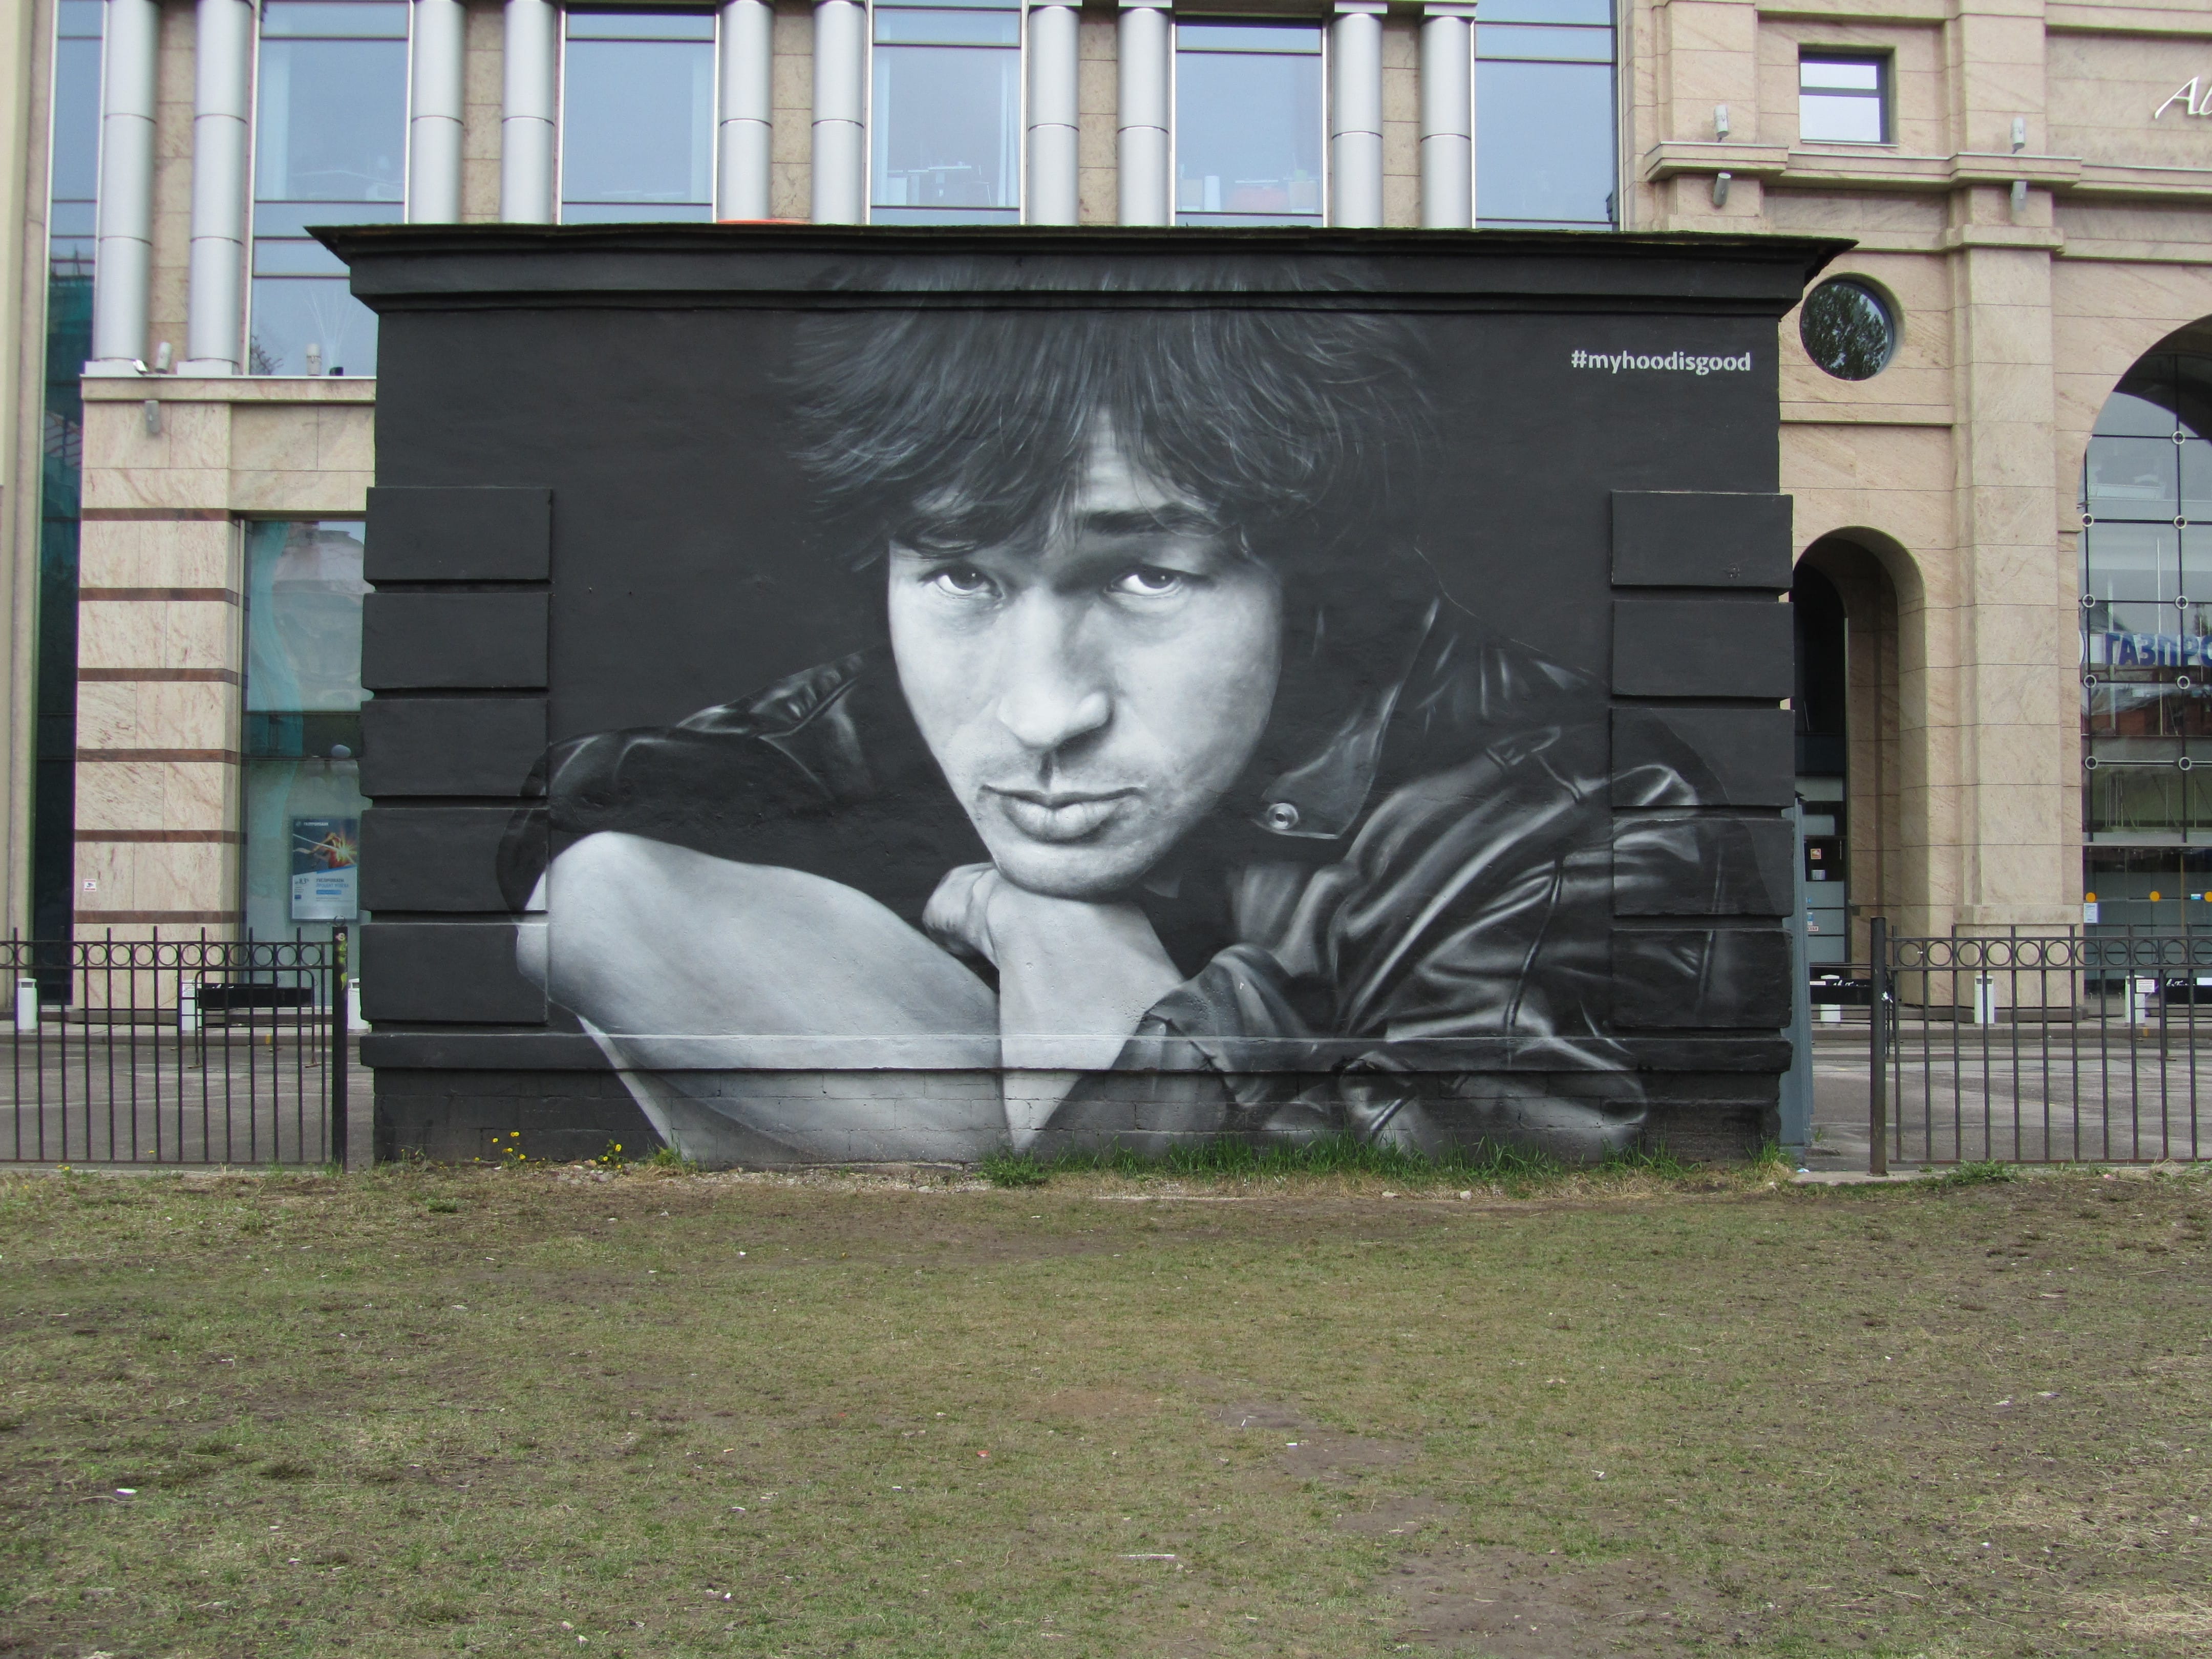 Graffiti 5169 Victor Tsoy, the Russian rock-icon from the 80s by the artist HoodGraff captured by elettrotajik in Saint-Petersburg Russia